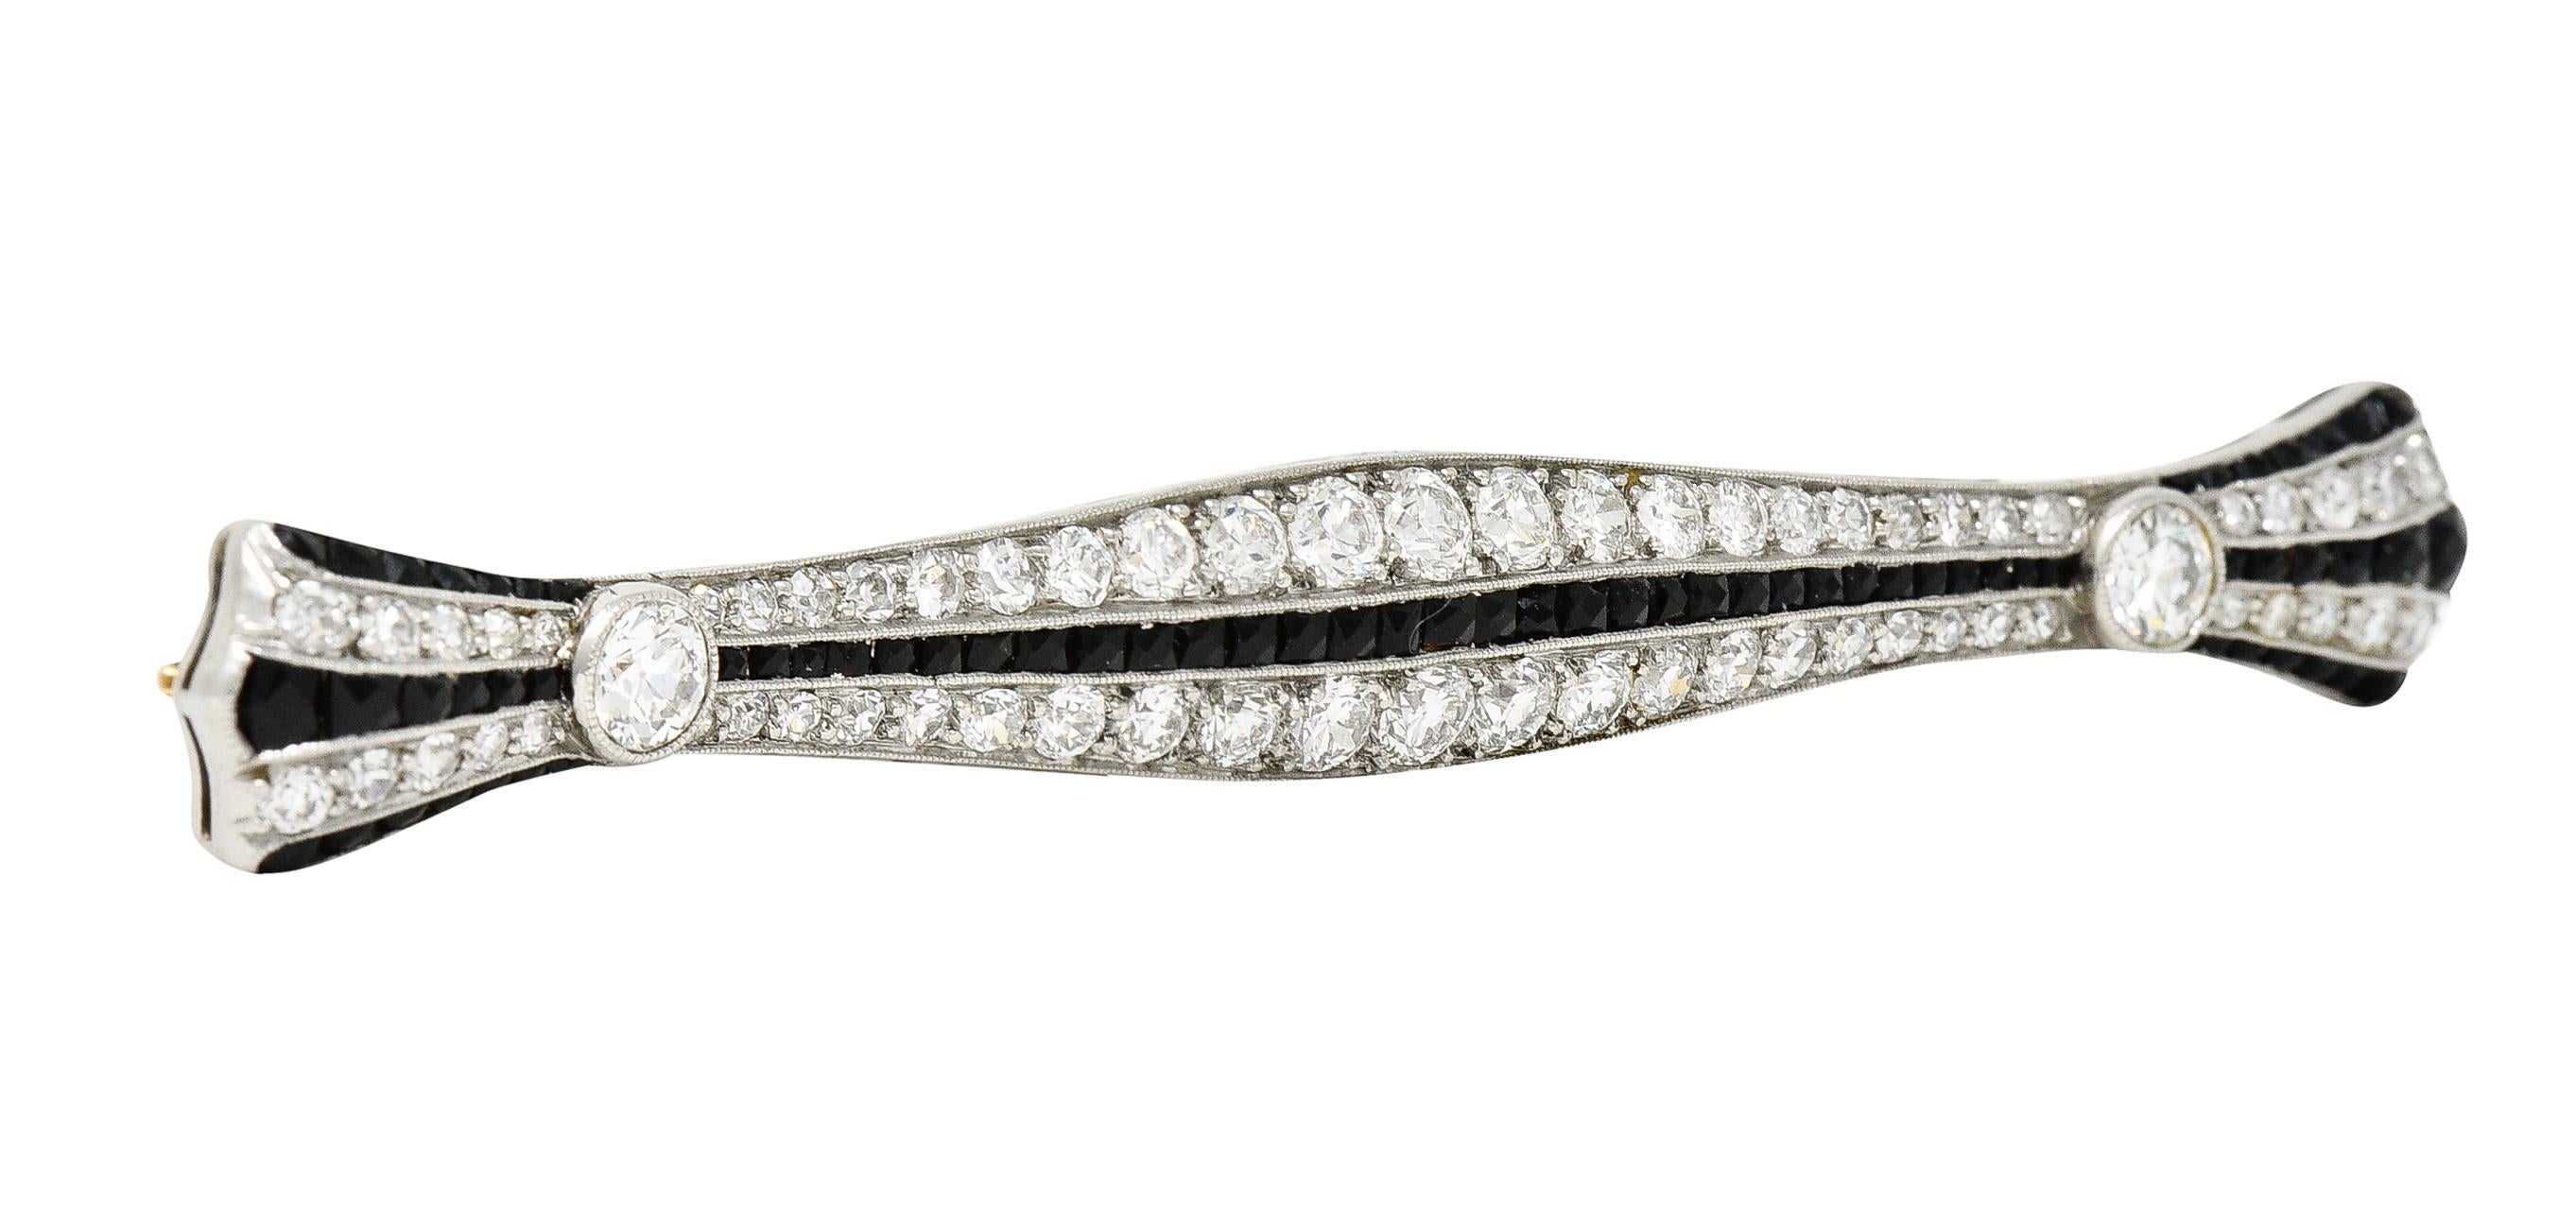 Bar brooch is designed East to West with an undulating but symmetrical profile and scalloped terminals. Profile cinches at two well matched and bezel set old European cut diamonds. Weighing in total approximately 0.40 carats with H/I color and VS